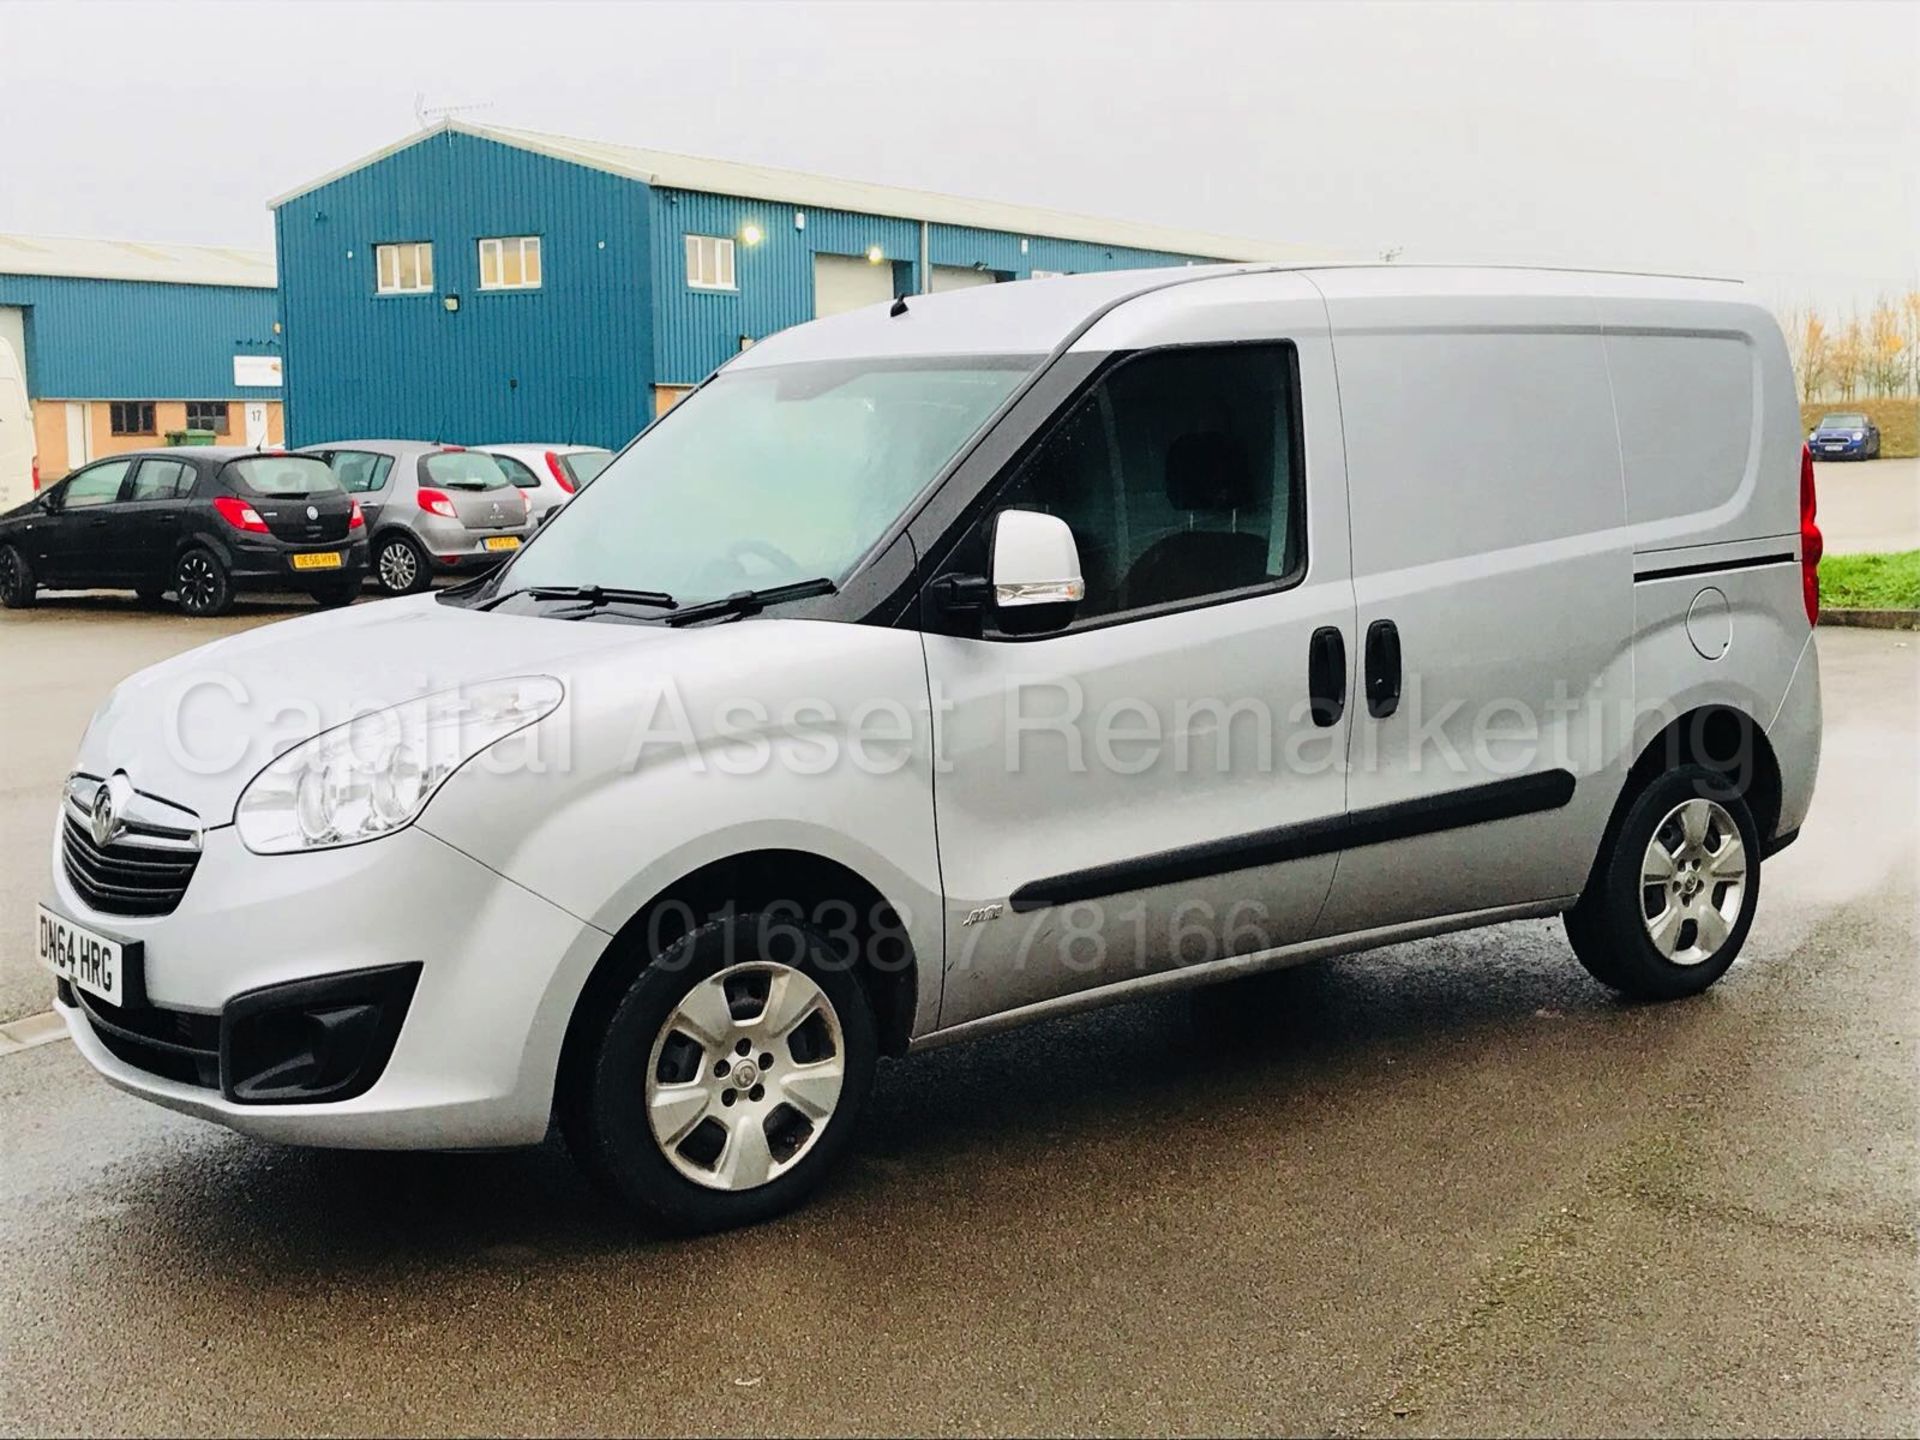 VAUXHALL COMBO 2000 L1H1 'SPORTIVE' (2015 MODEL) 'CDTI - 90 BHP' **AIR CON** (1 OWNER FROM NEW) - Image 3 of 19